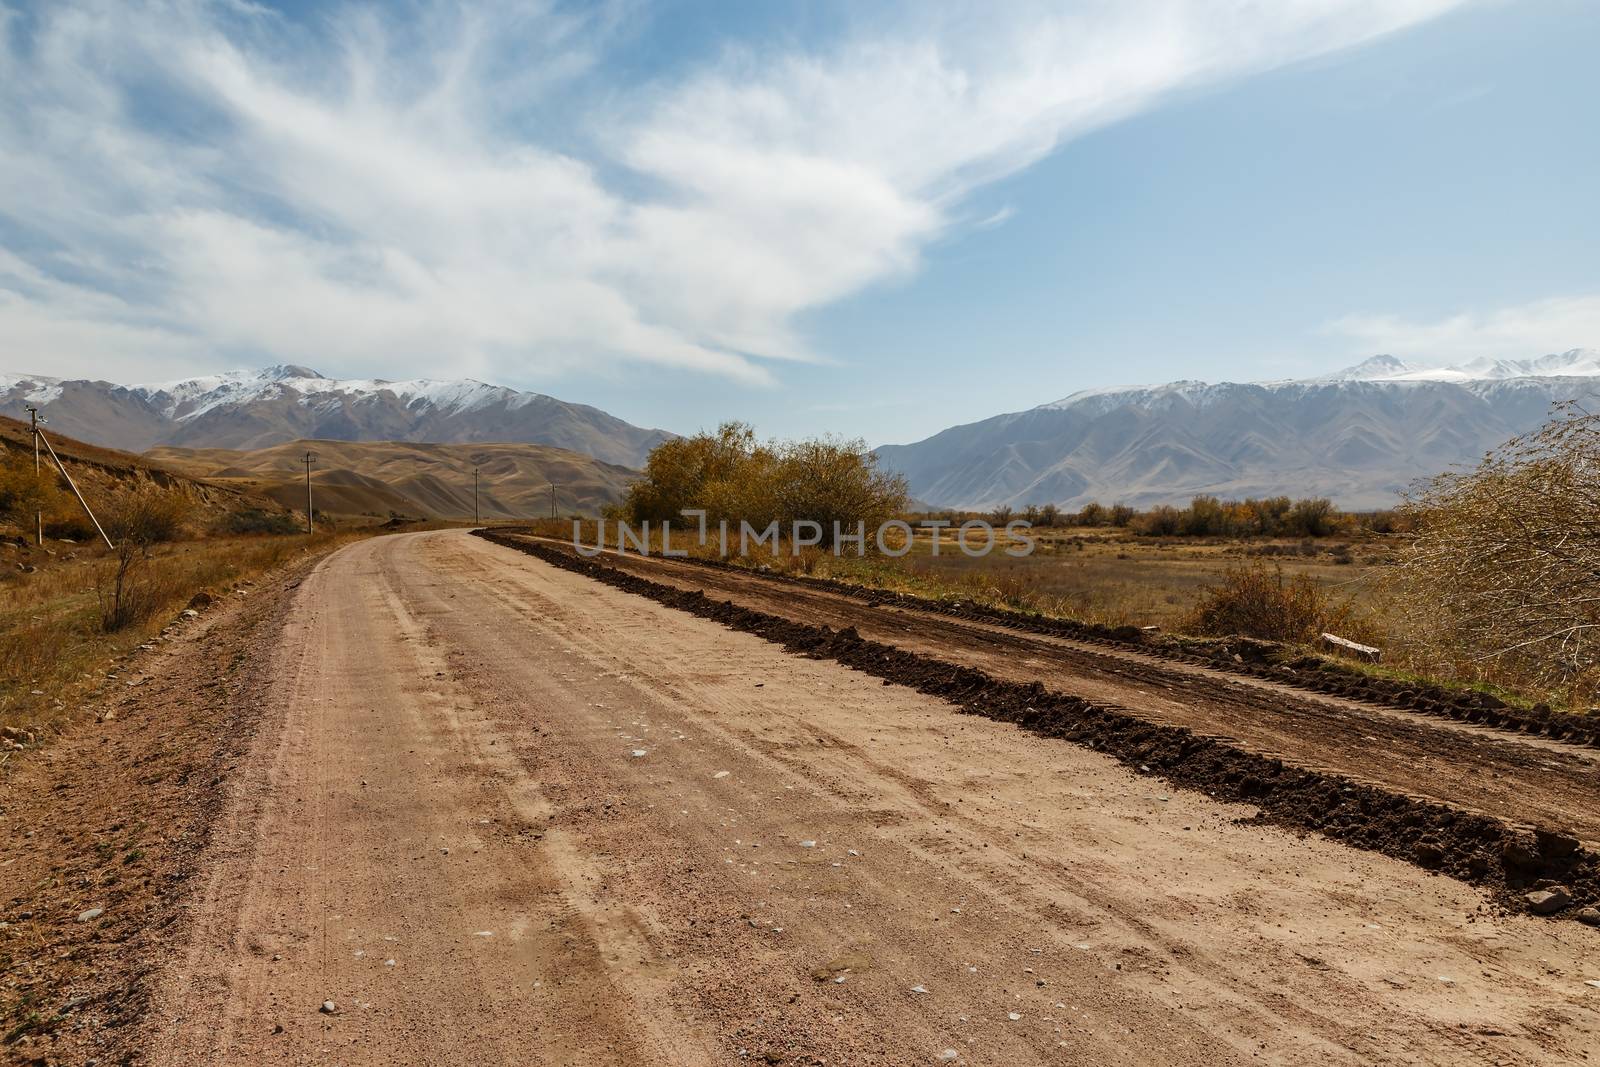 A367 highway, passing in the Chui region, Kyrgyzstan by Mieszko9